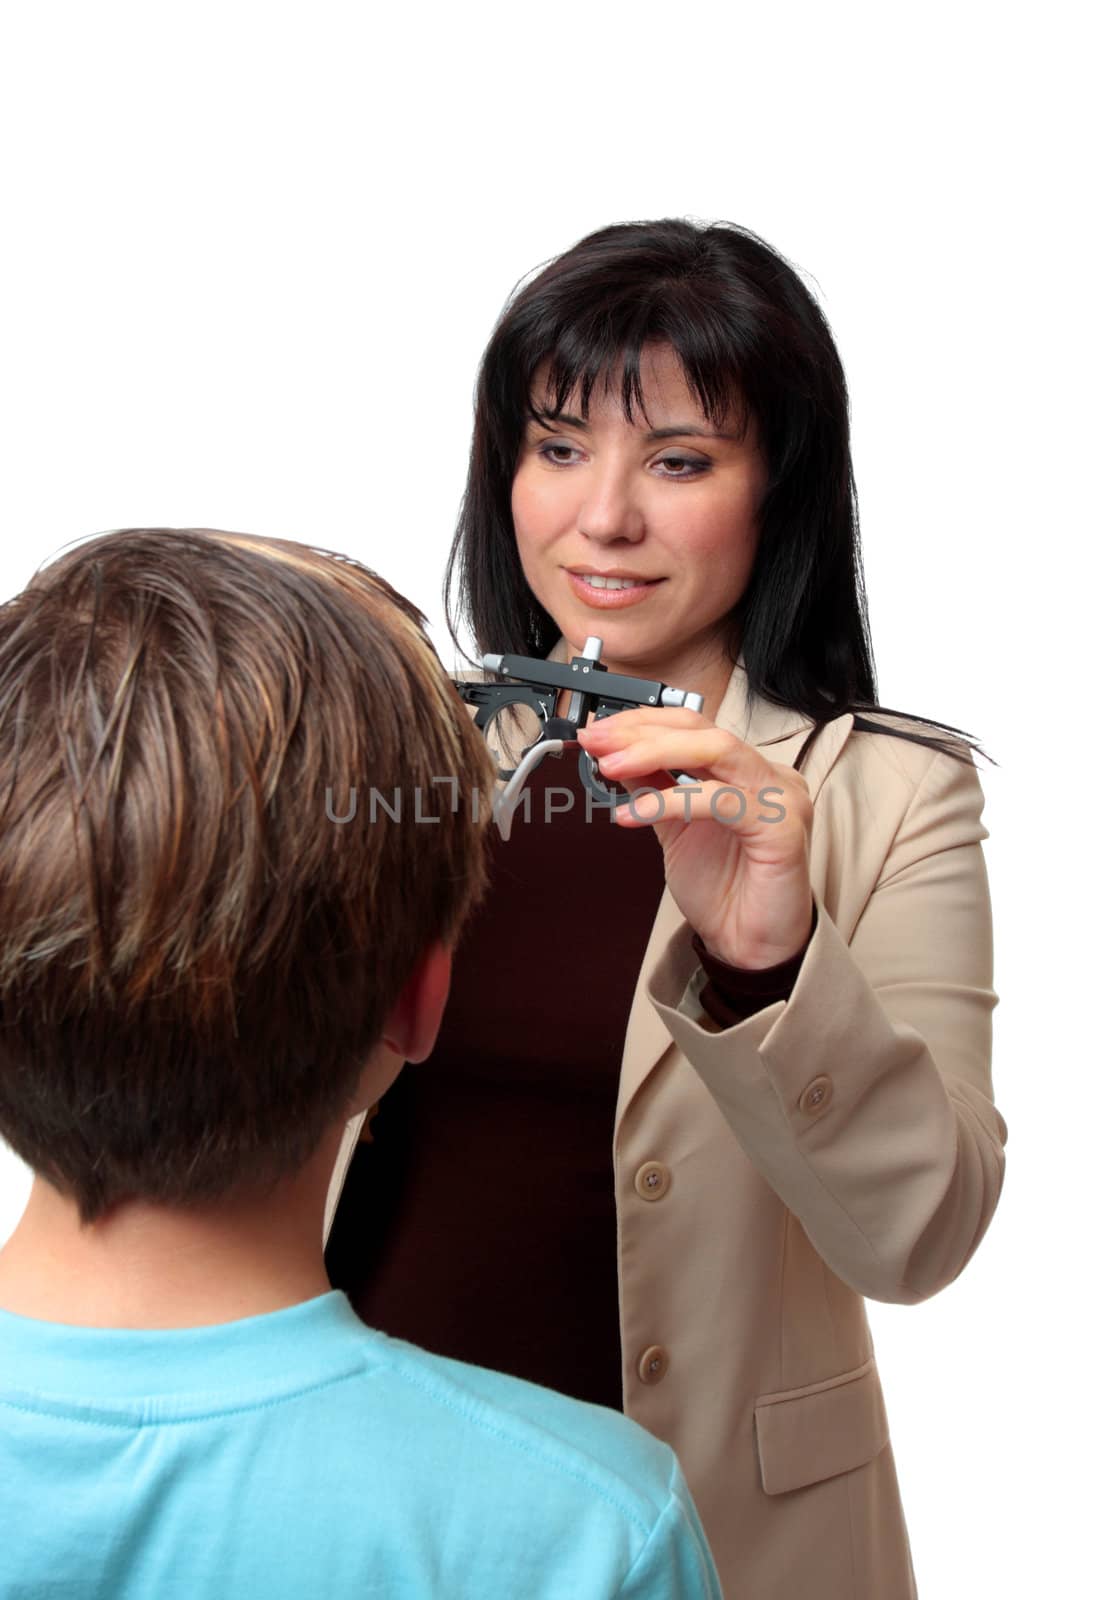 A child getting a vision checkup at the optometrist